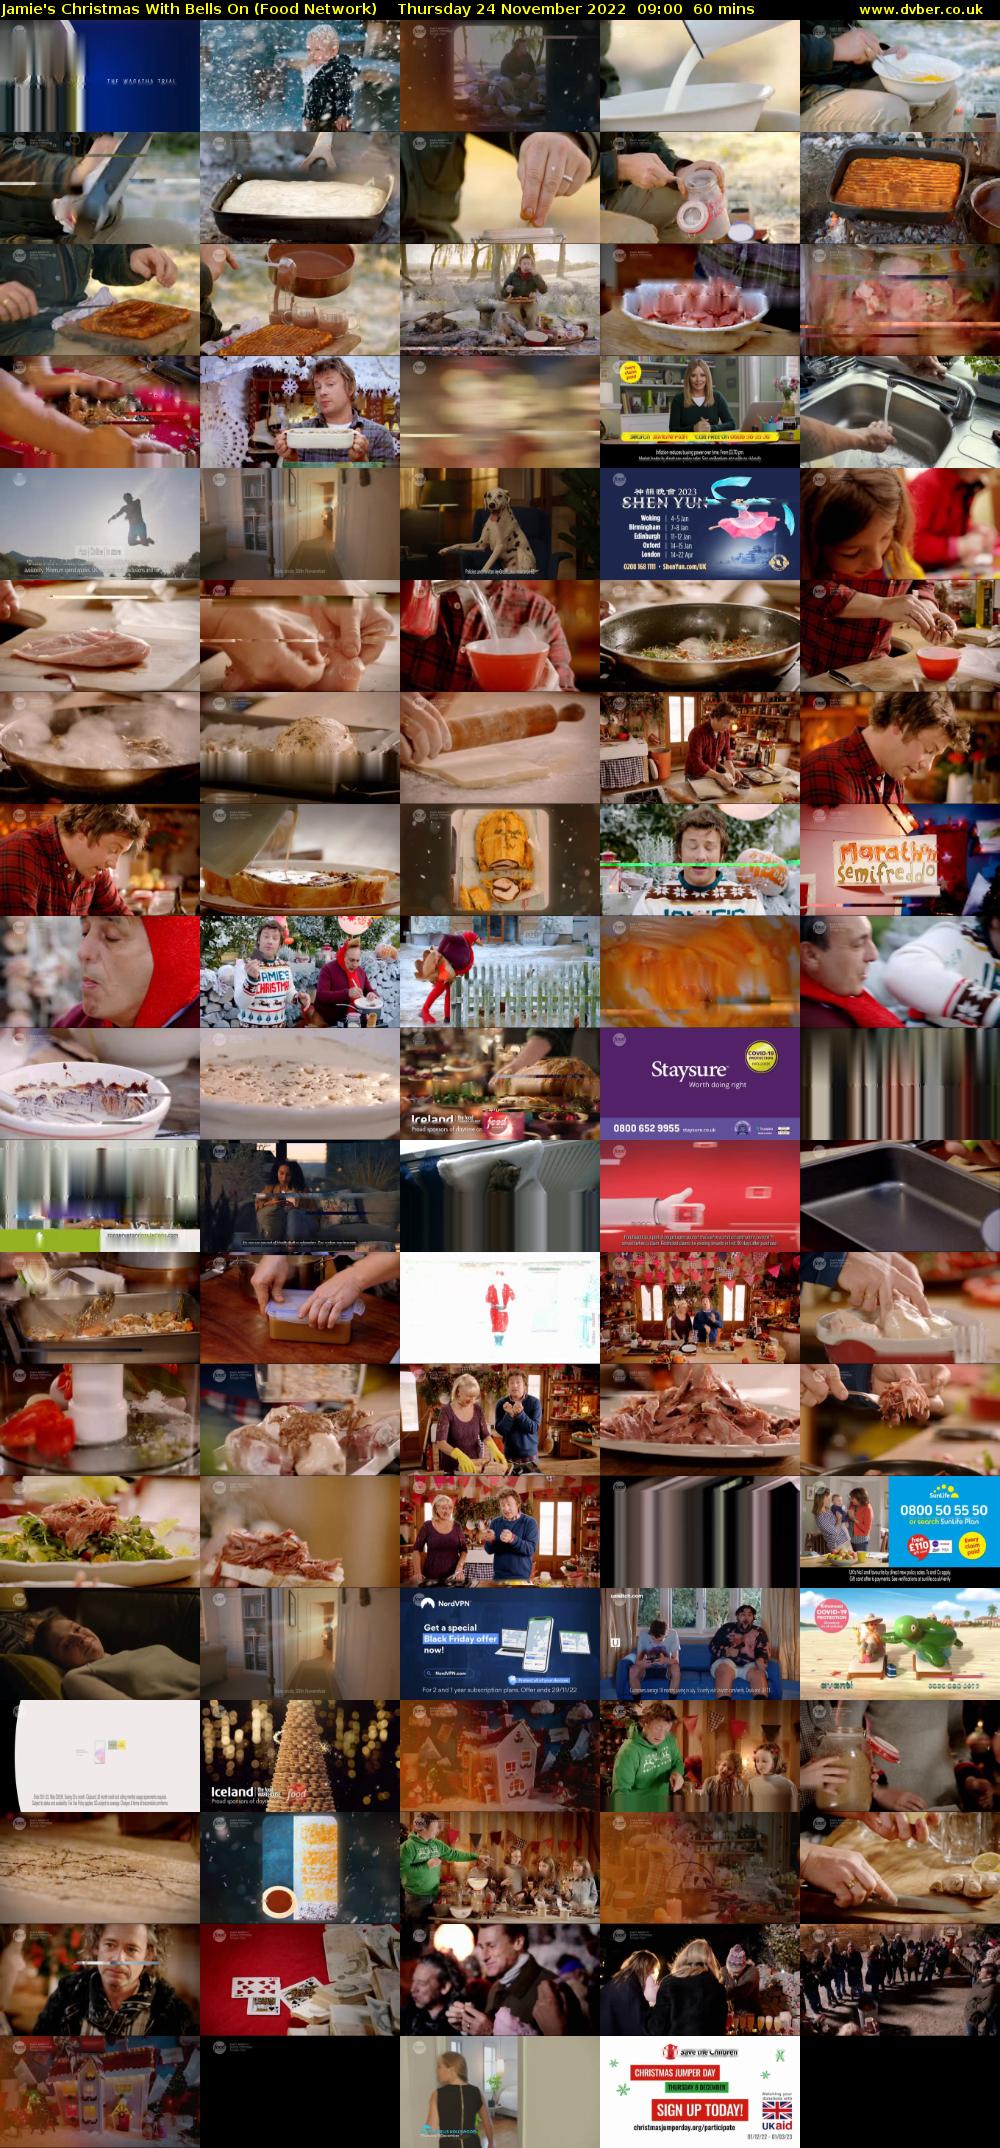 Jamie's Christmas With Bells On (Food Network) Thursday 24 November 2022 09:00 - 10:00